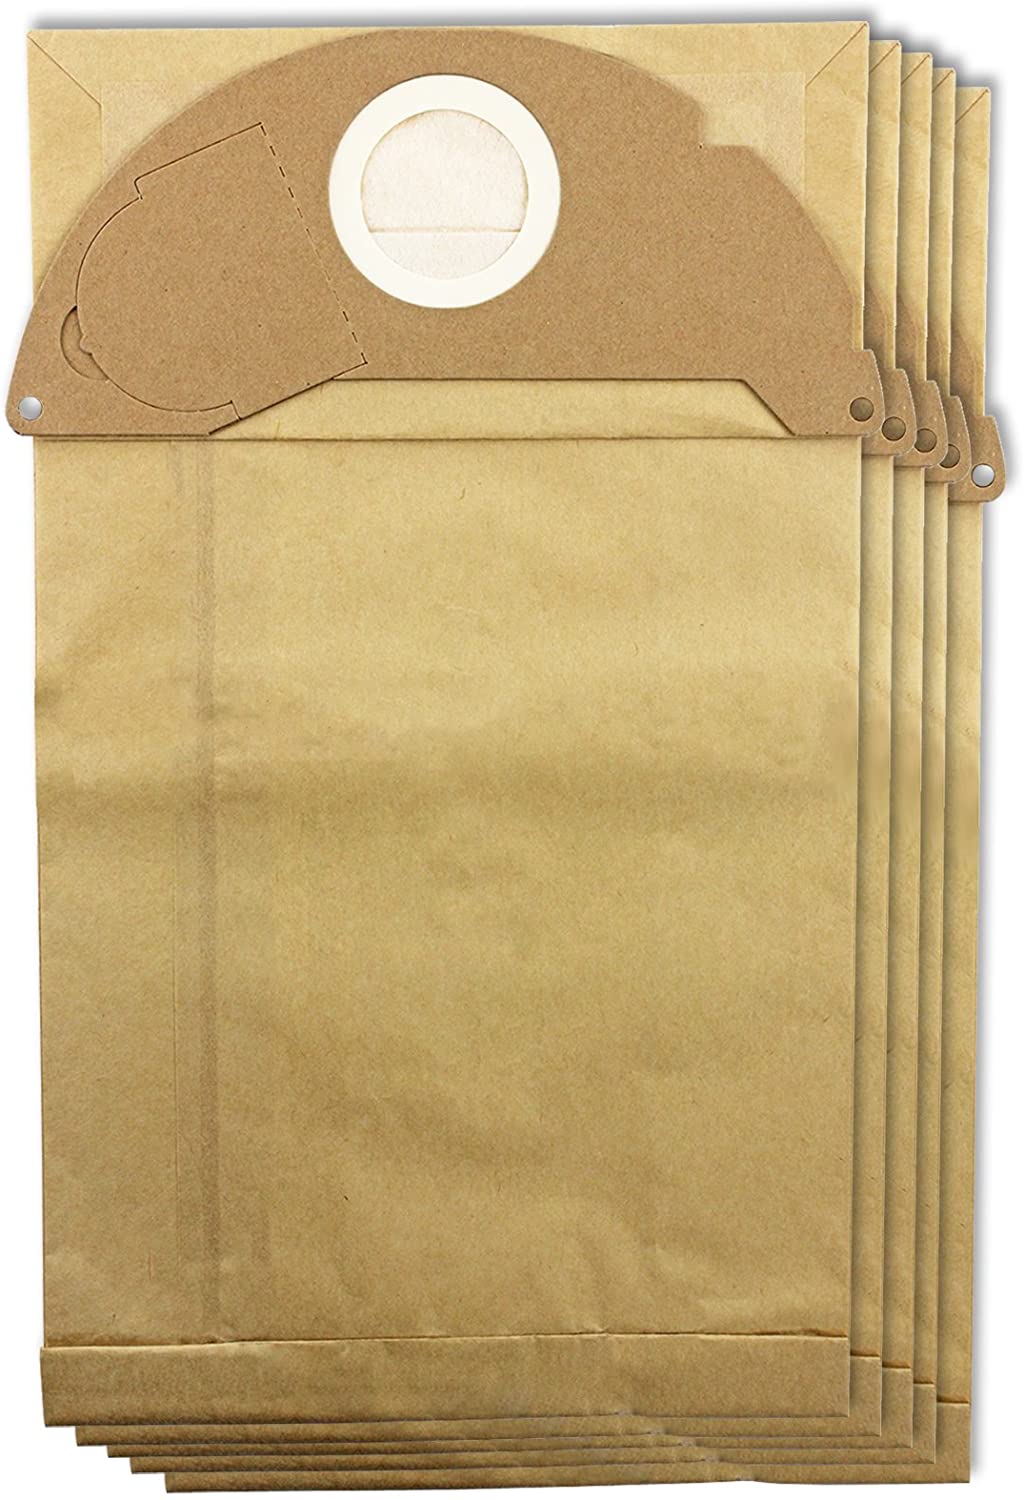 Strong Dust Bags for Karcher Vacuum Cleaners (Pack of 5 + Fresheners)